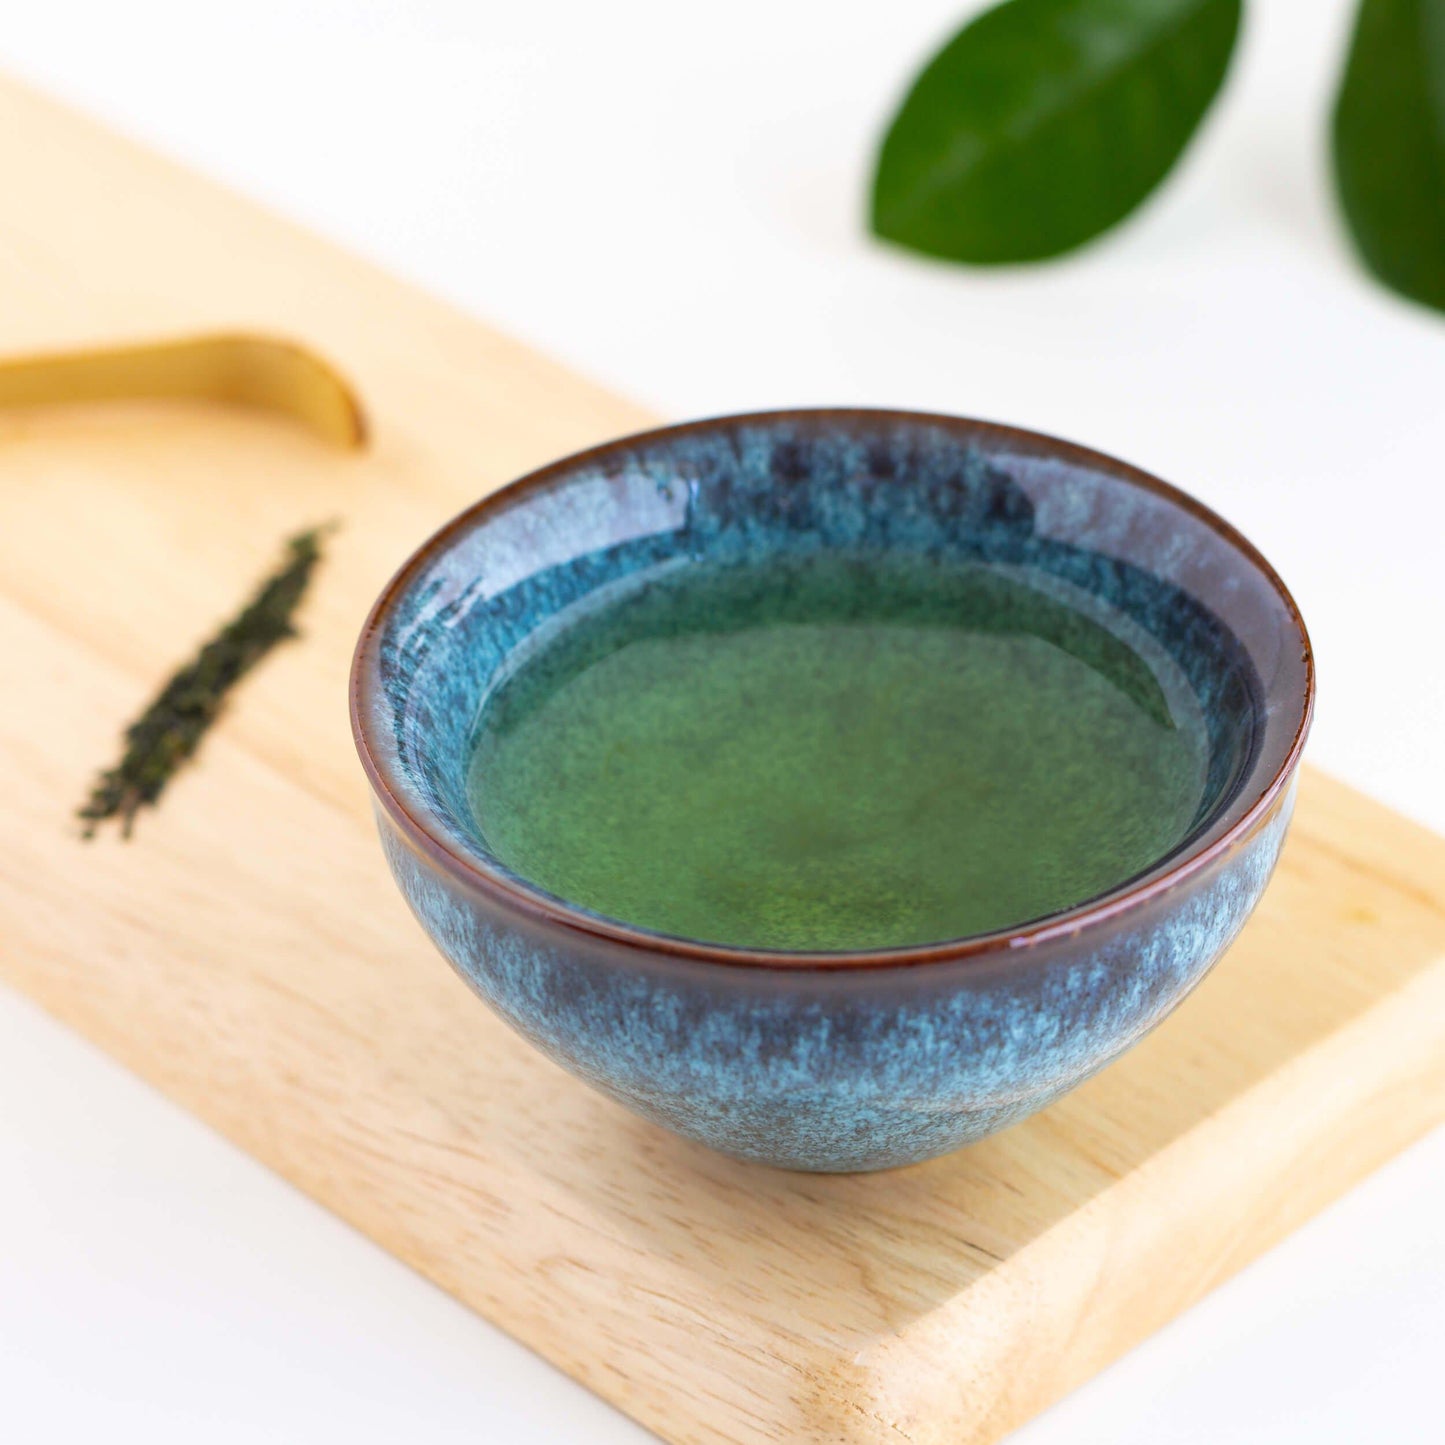 Gyokuro Green Tea shown as brewed tea in a small teal blue teacup displayed on a bamboo plank